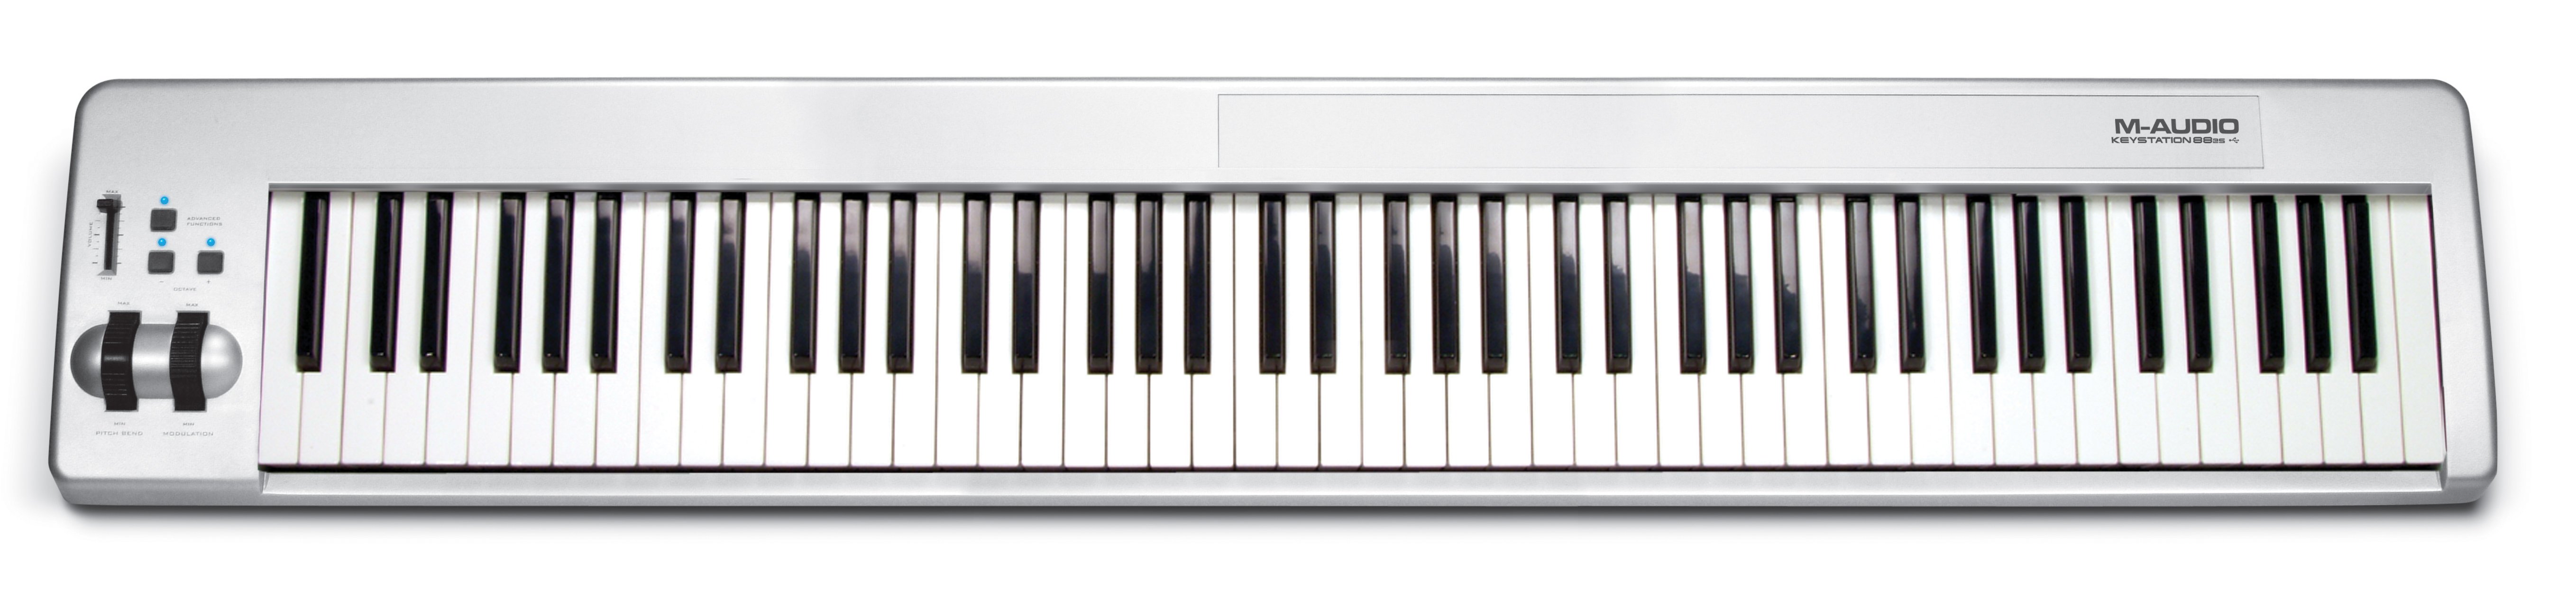 Get Keys Worth Of Midi Control For An Affordable Price This